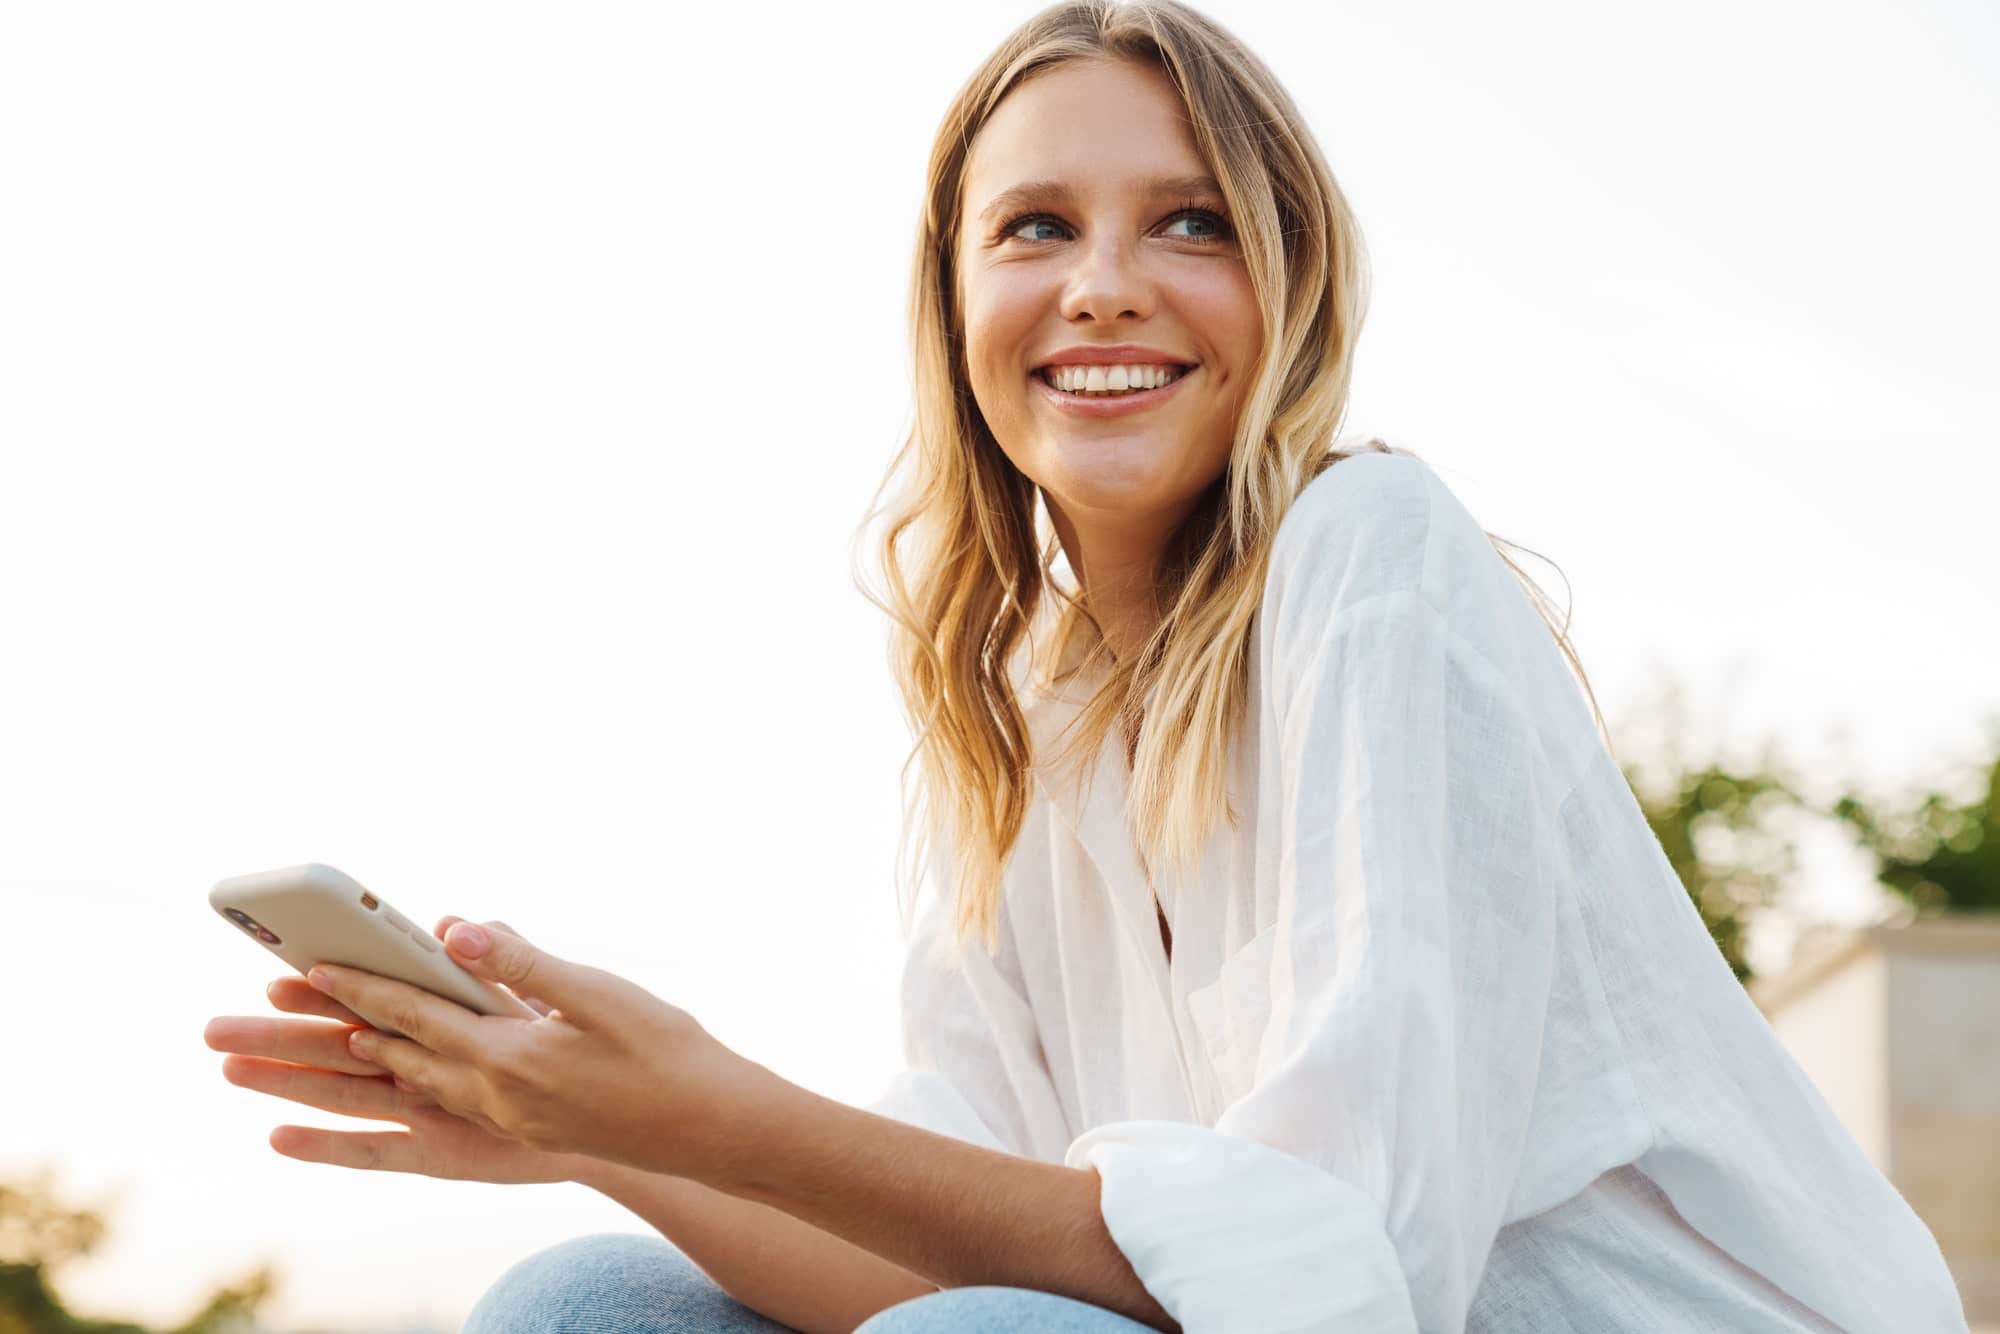 Nice happy woman smiling and using mobile phone while sitting outdoors